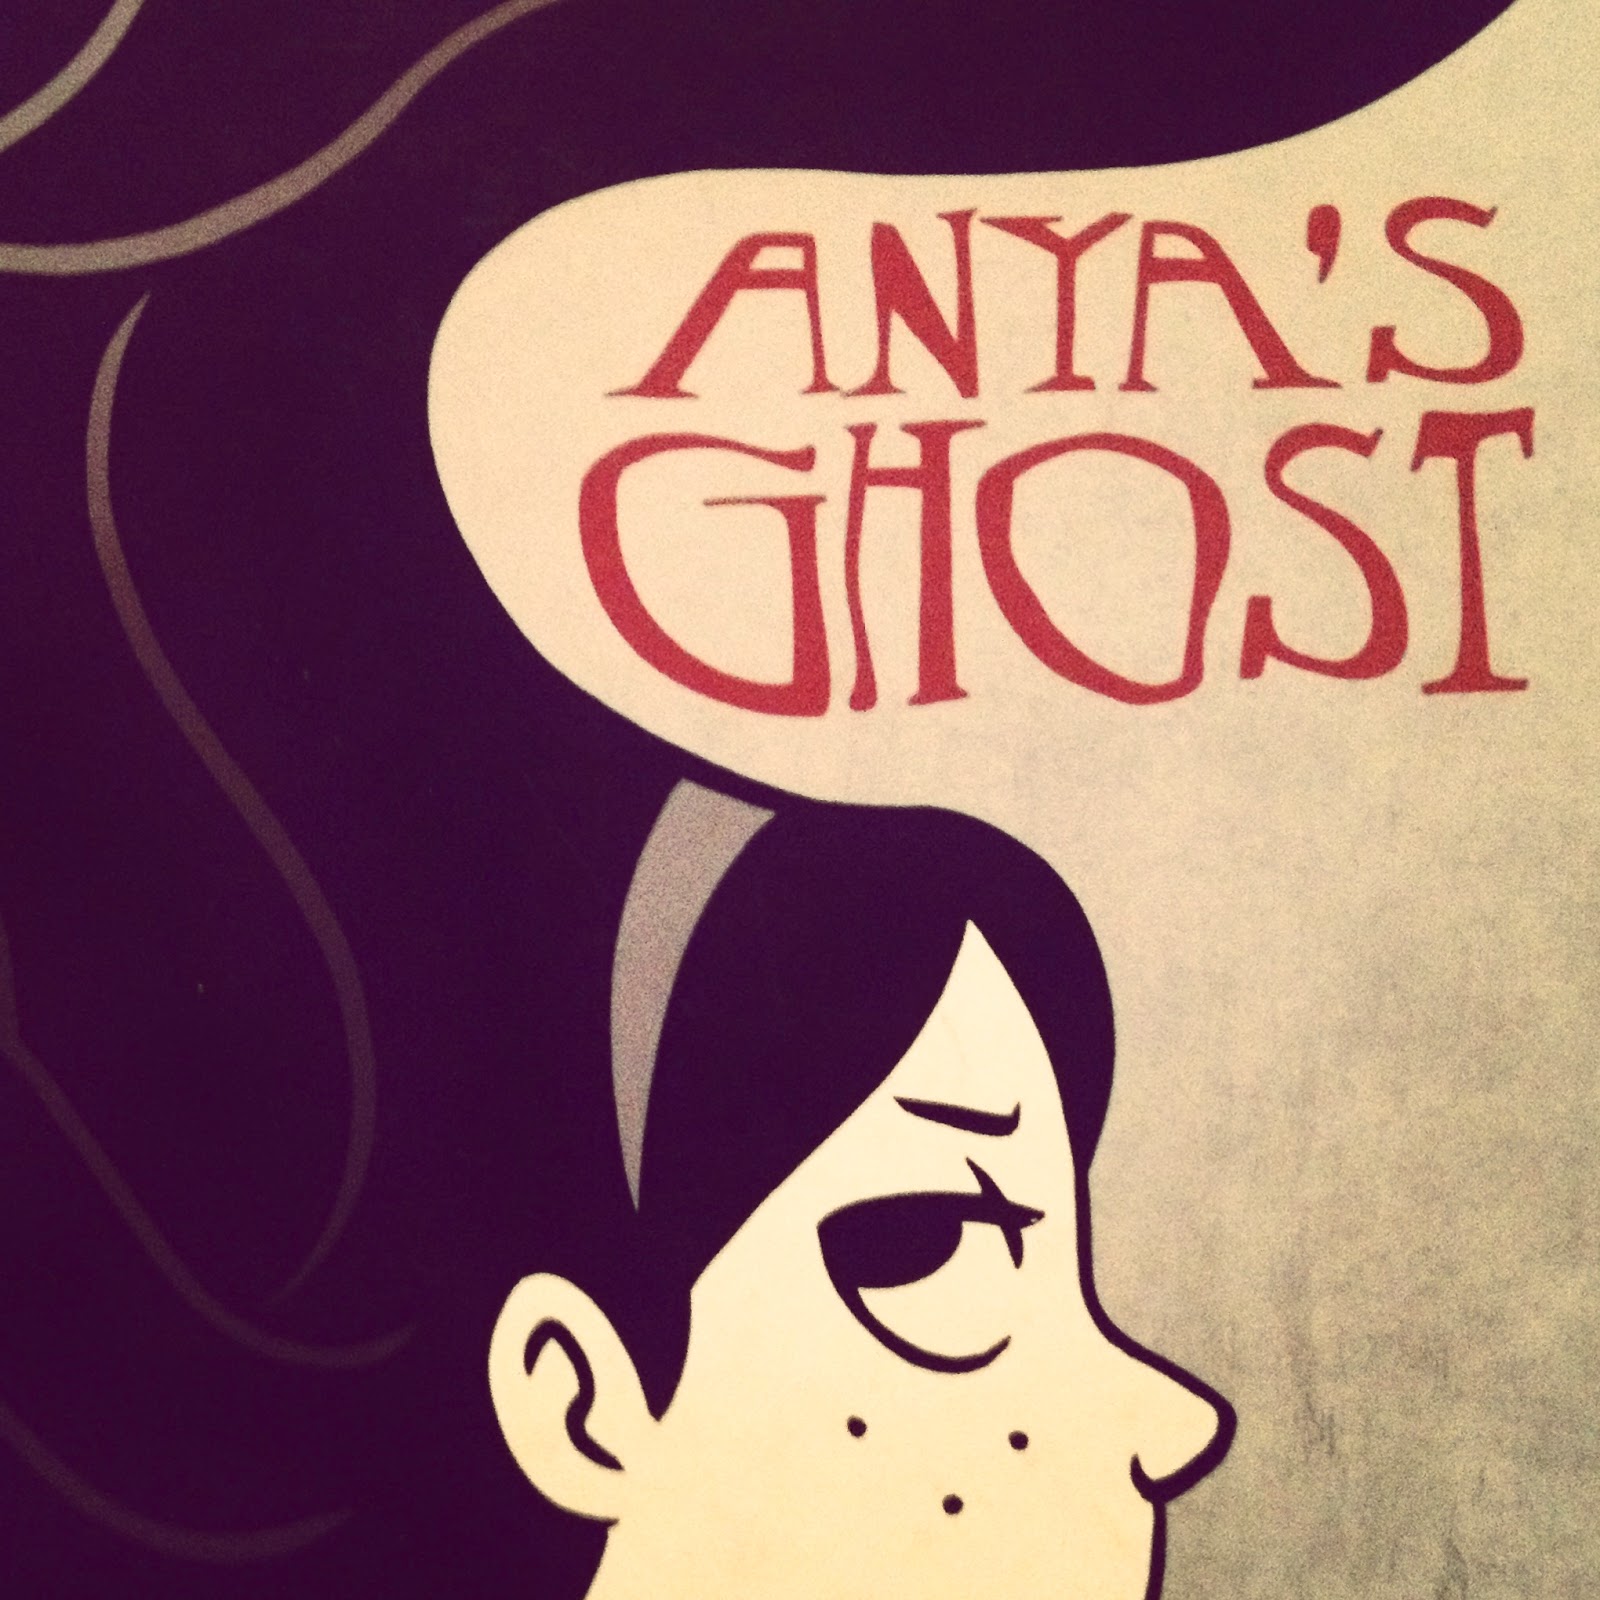 Anyas Ghost - Book Reviews 2014 | Crappy Candle